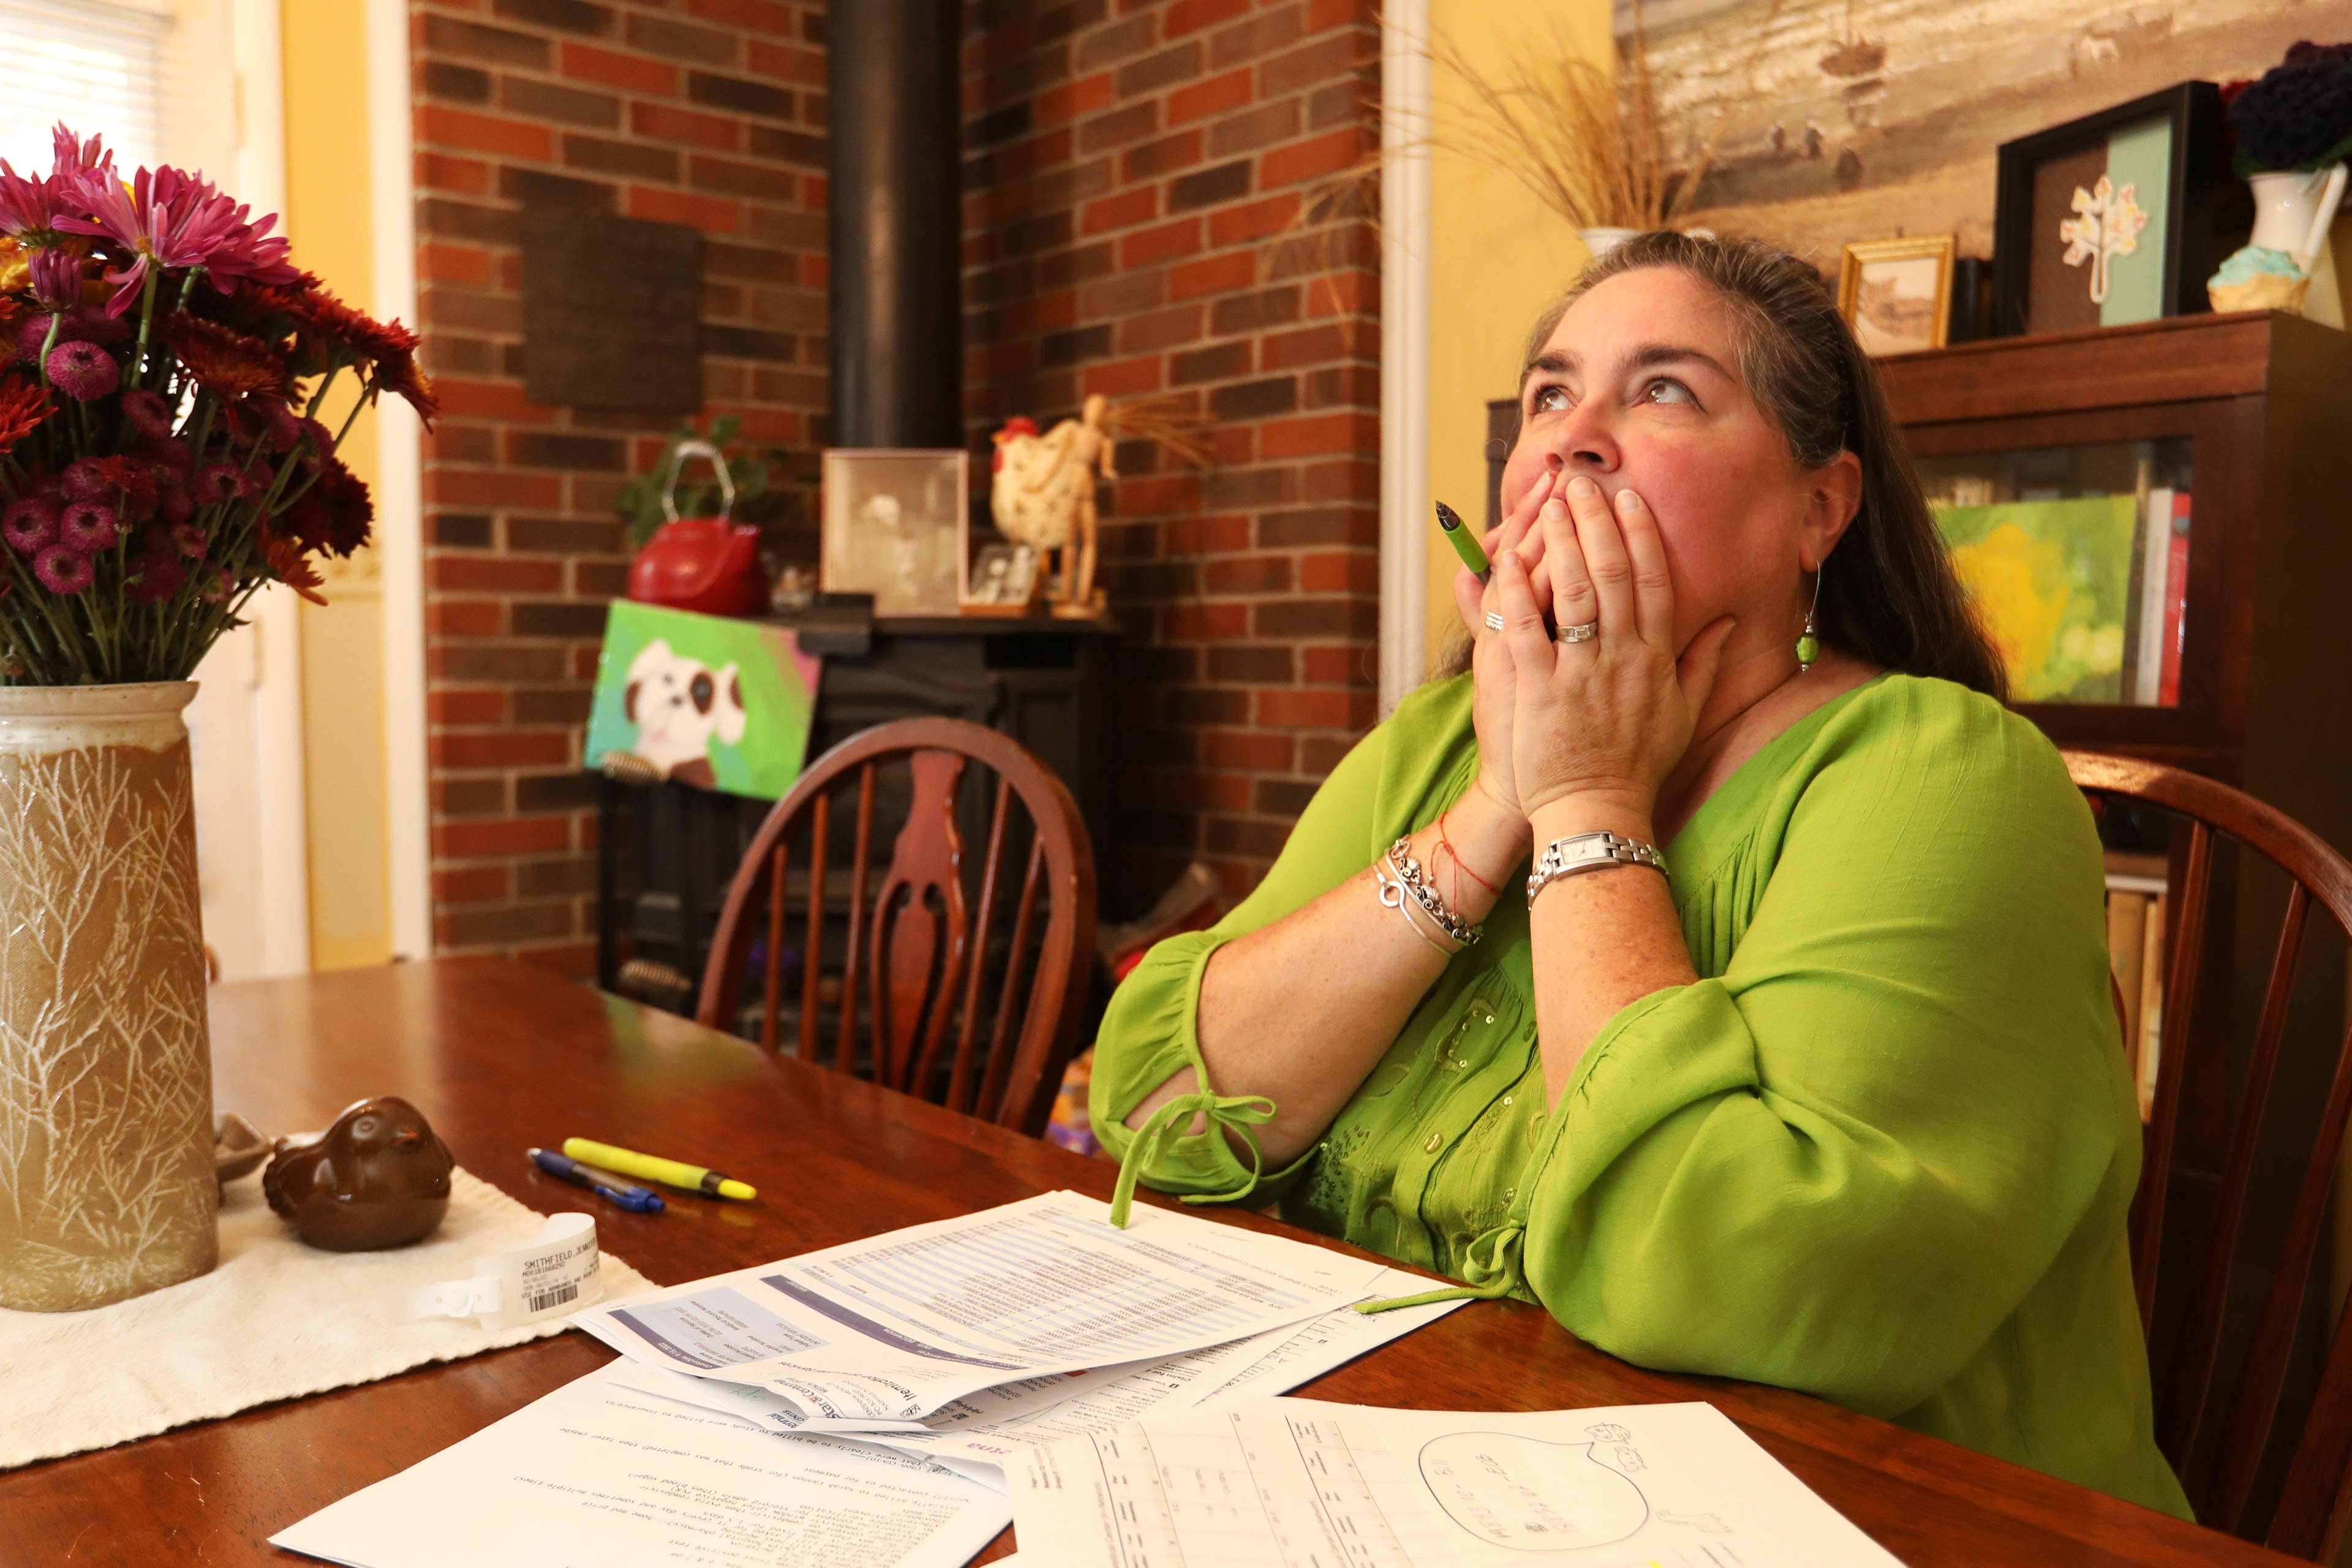 A photo shows Jennifer Smithfield at a table, looking over her medical bills.